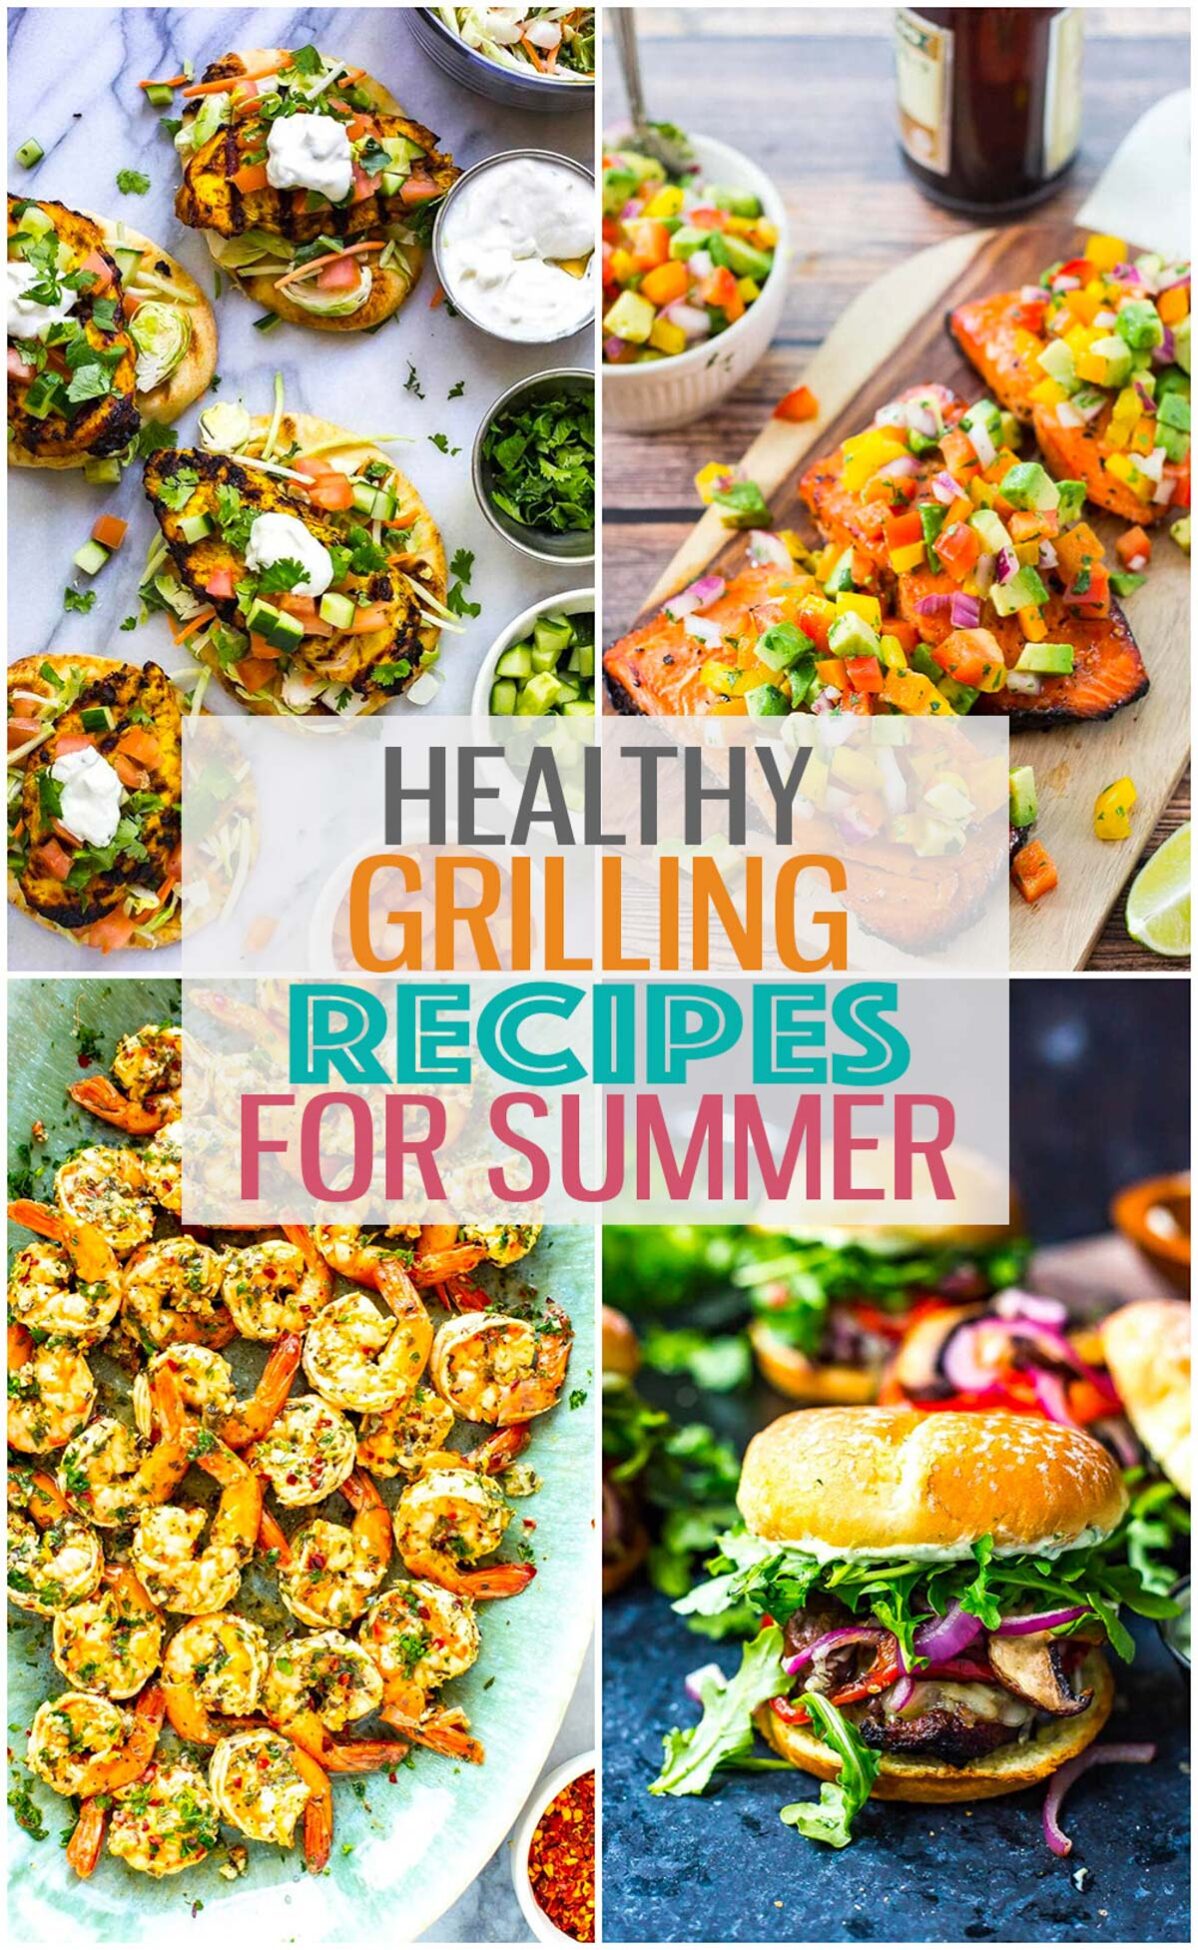 A collage of four different grilling recipes with the text "Healthy Grilling Recipes for Summer" layered over top.